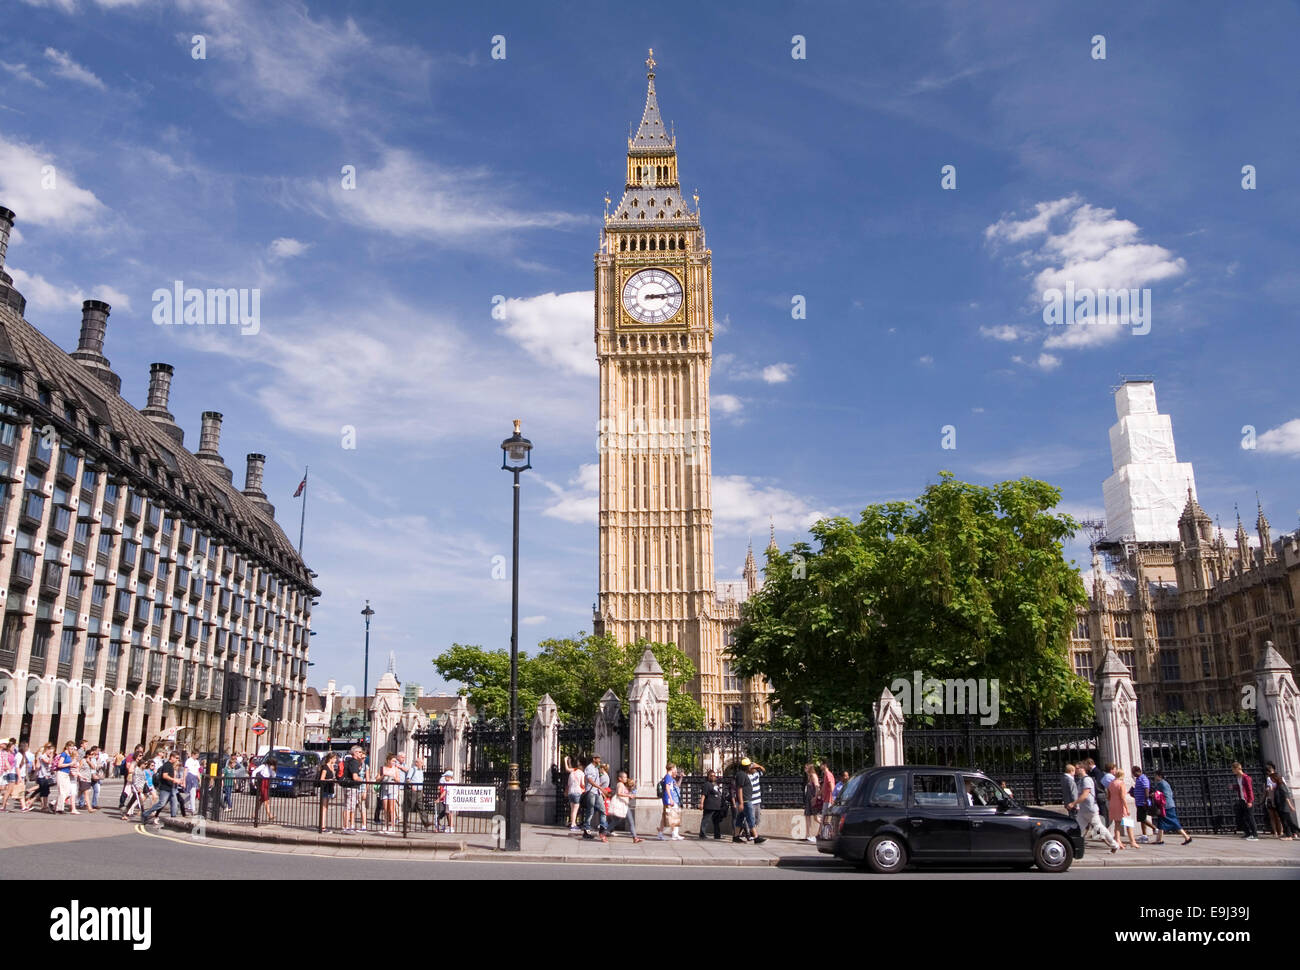 London 20 Aug 2013 : Big Ben stands tall above the busy pavements of a sunny London afternoon Stock Photo